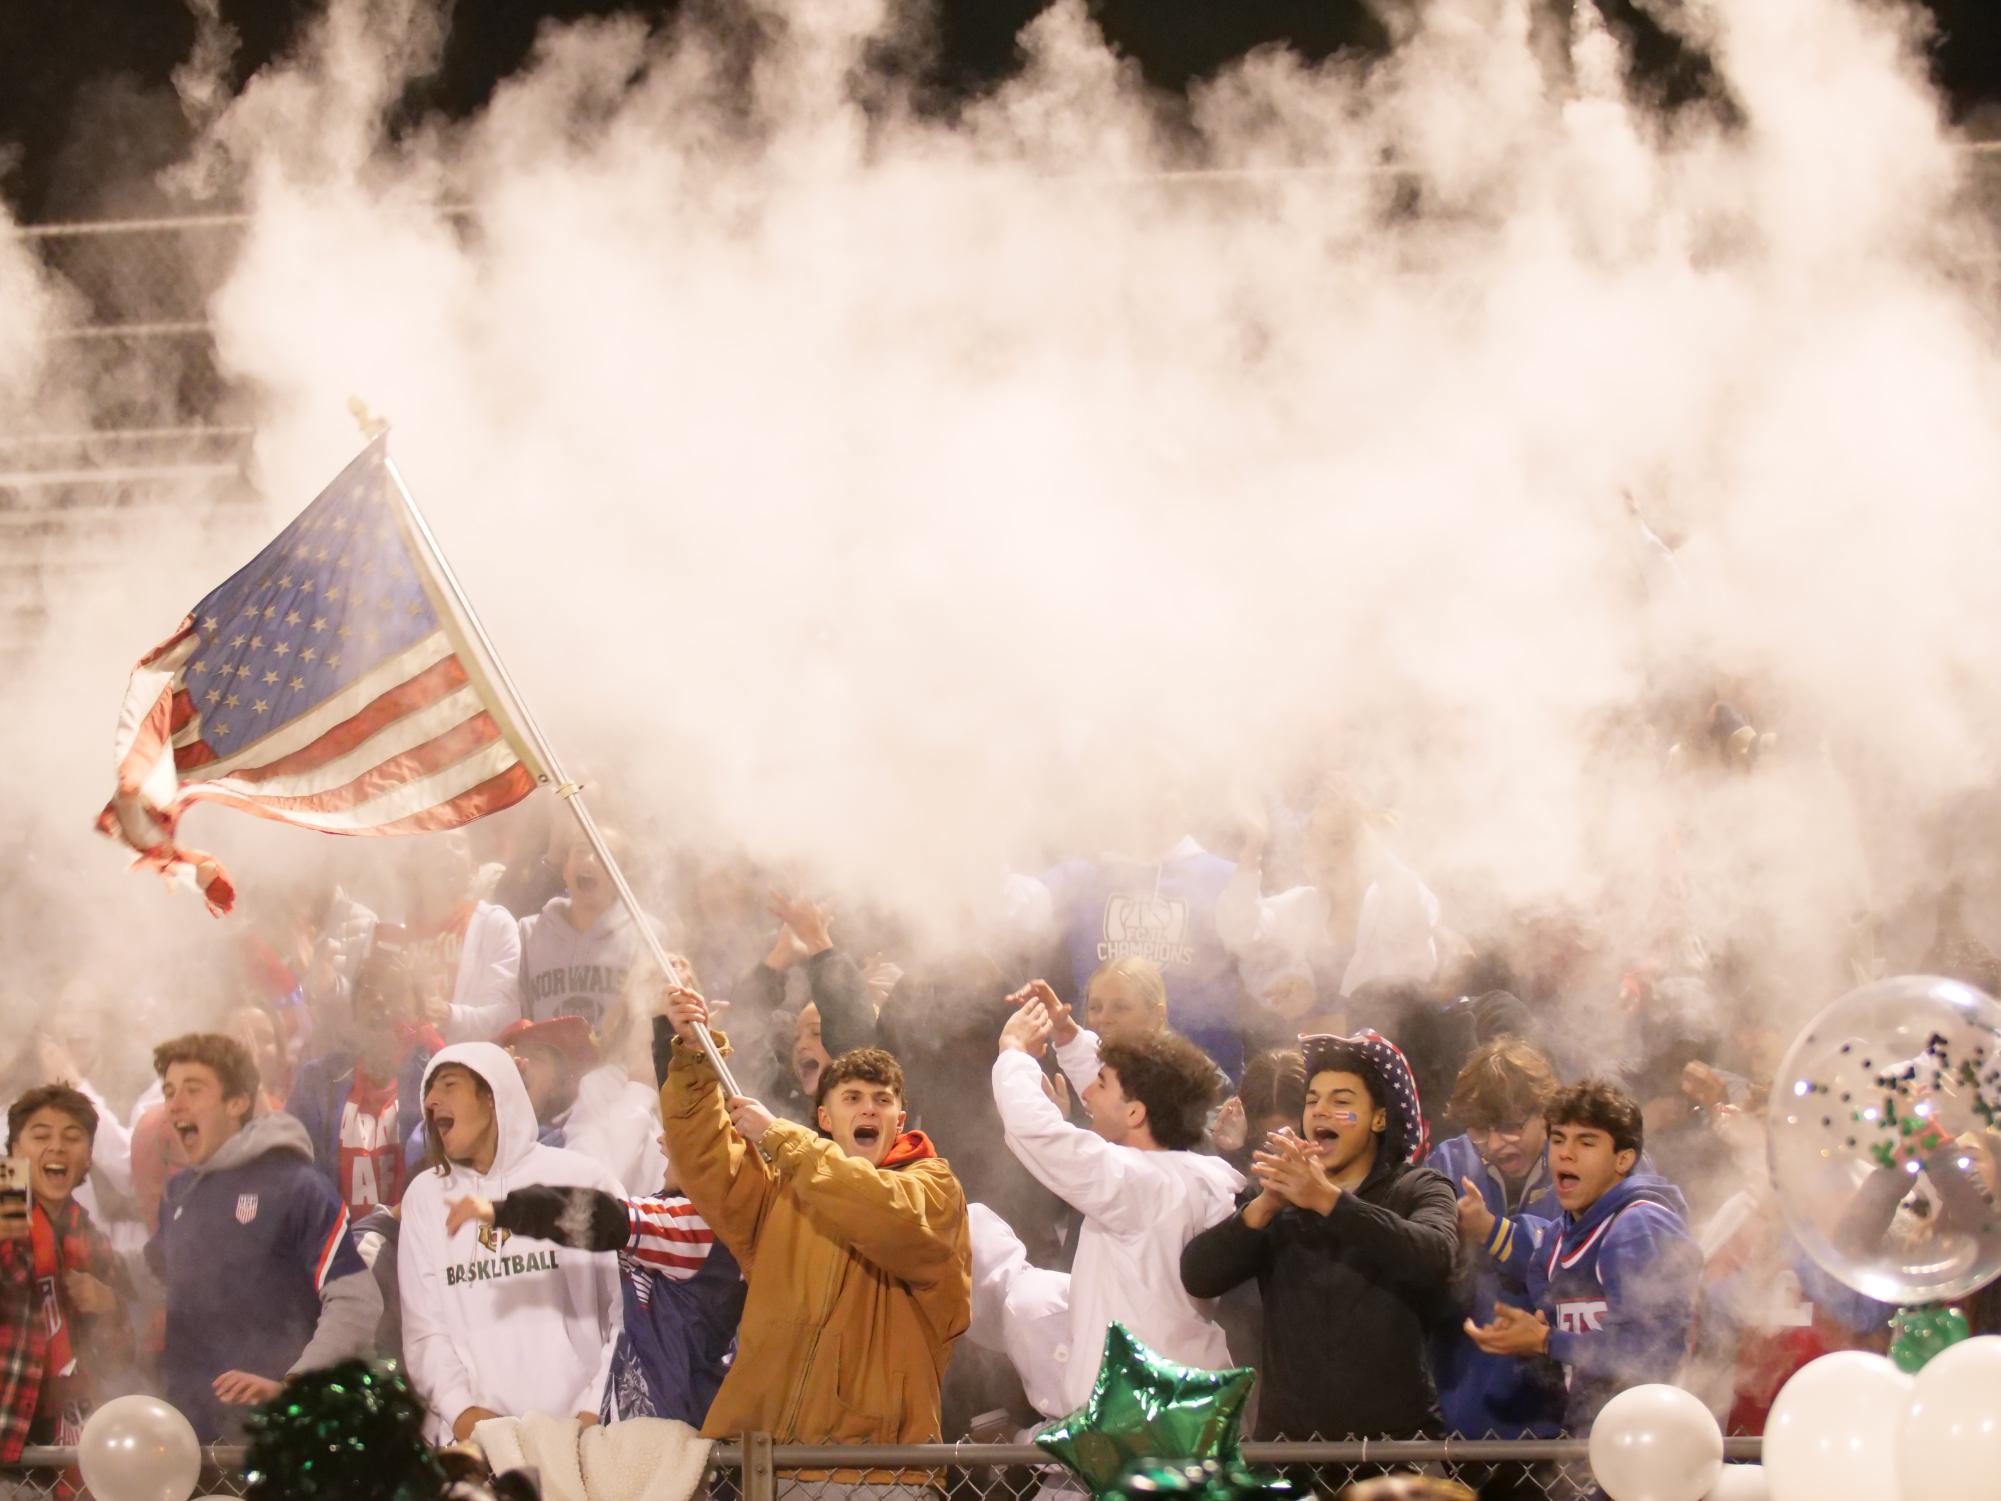 Bear Pack Shows Up Strong for USA Night